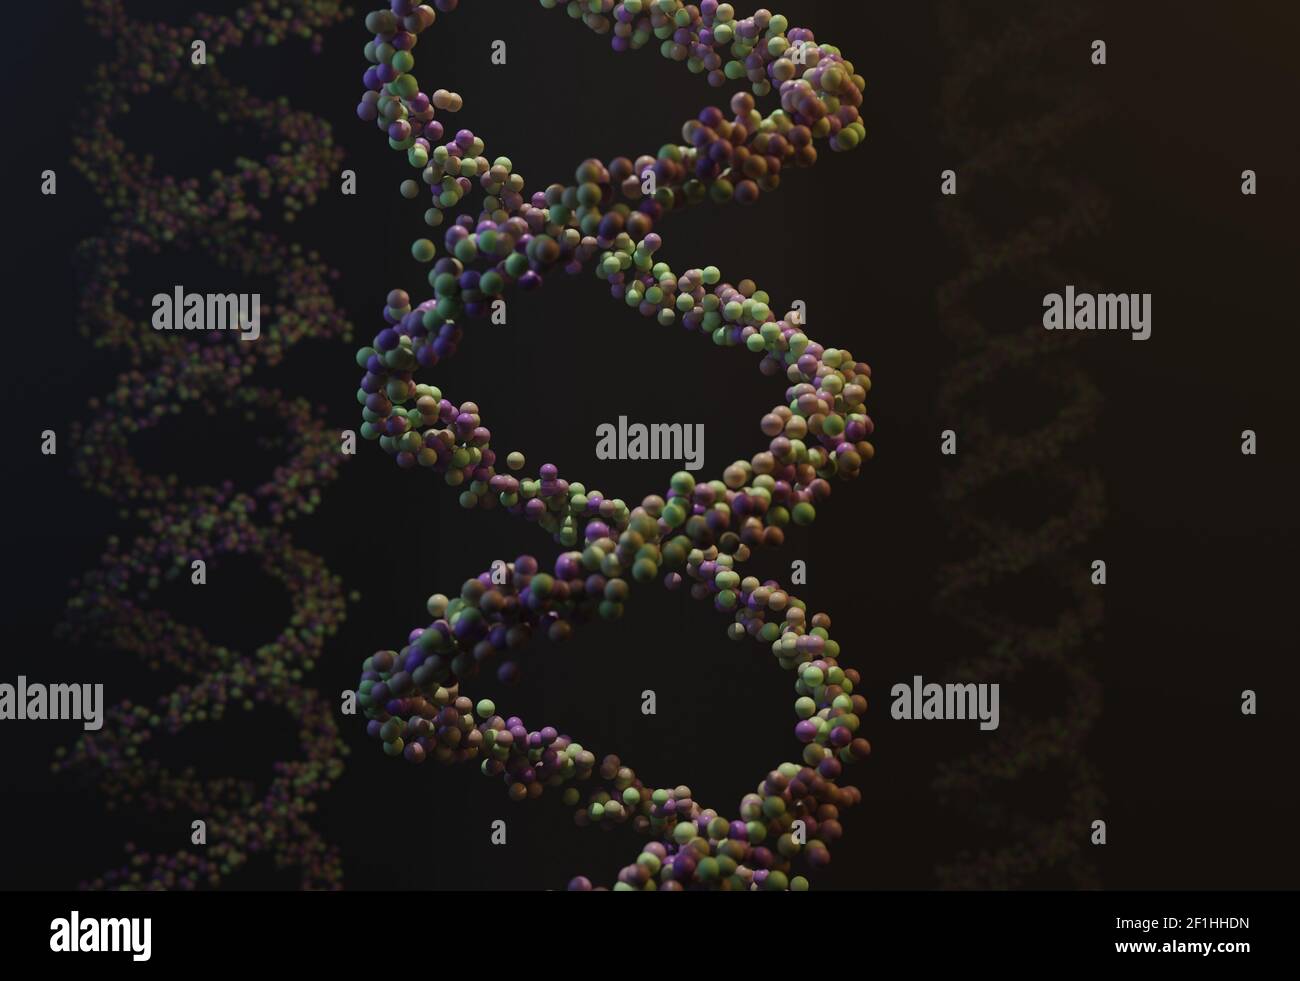 Sequenced pattern of DNA molecule atoms in threads 3d illustration Stock Photo